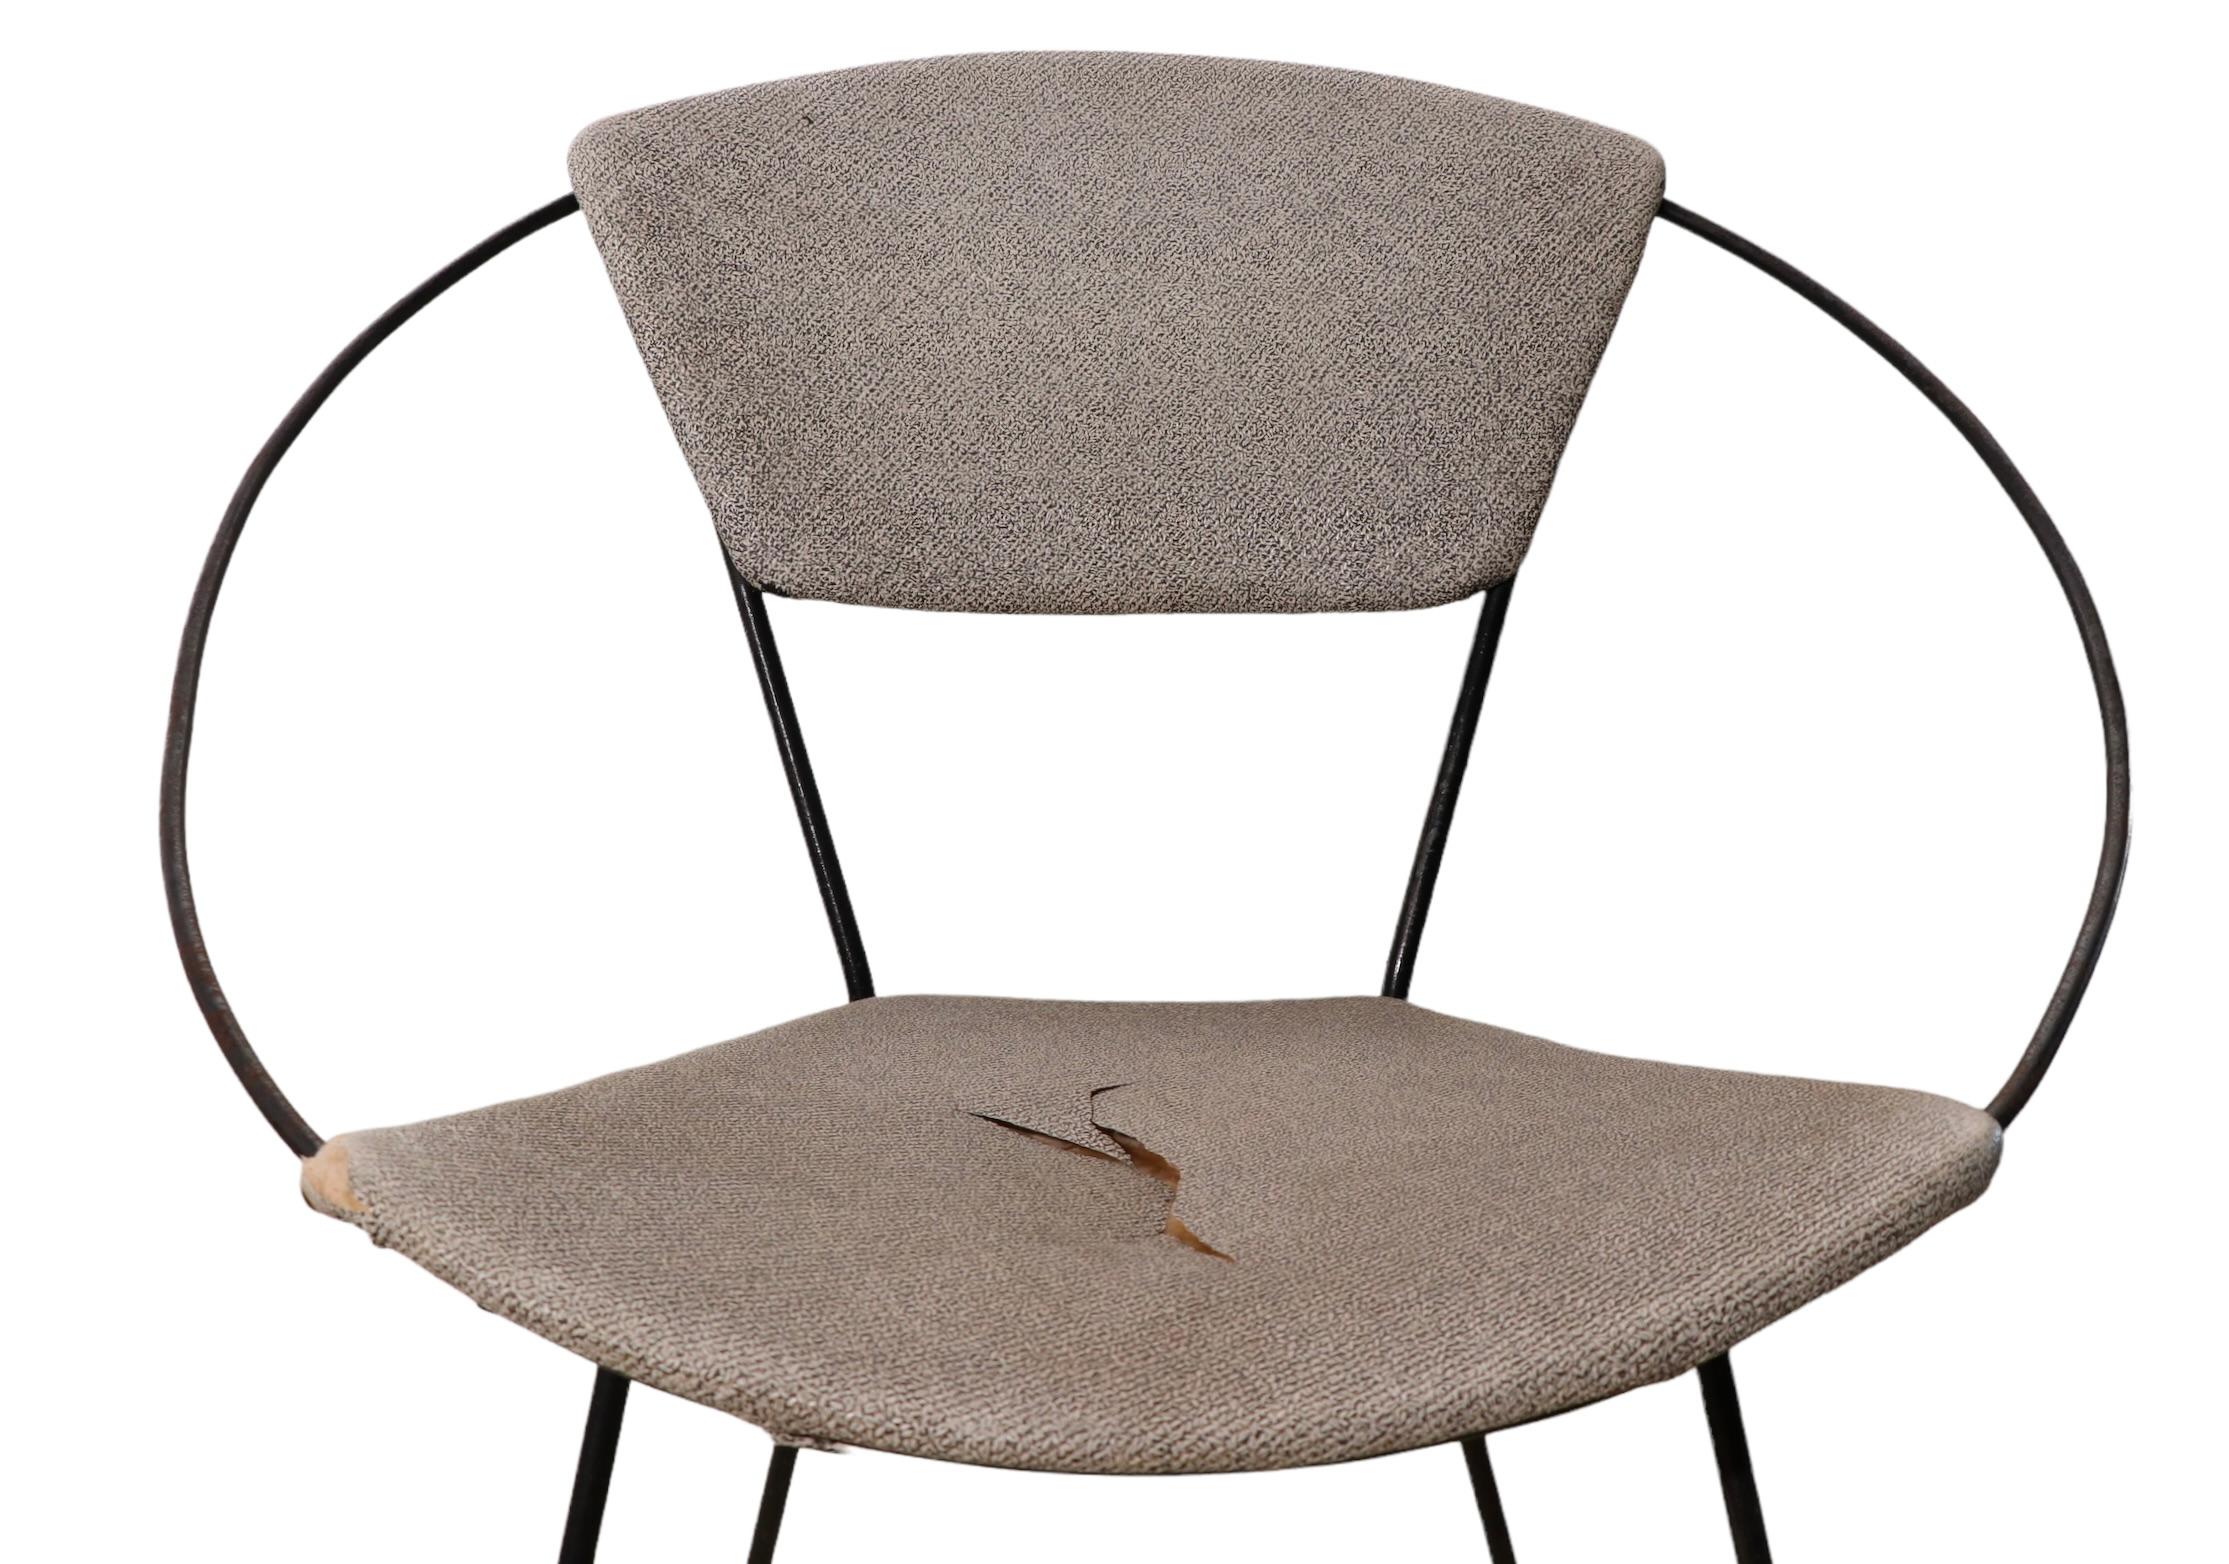 American Pr. Wrought Iron Mid Century Hoop Chairs by John Cicchelli for Riley Wolff 1950s For Sale